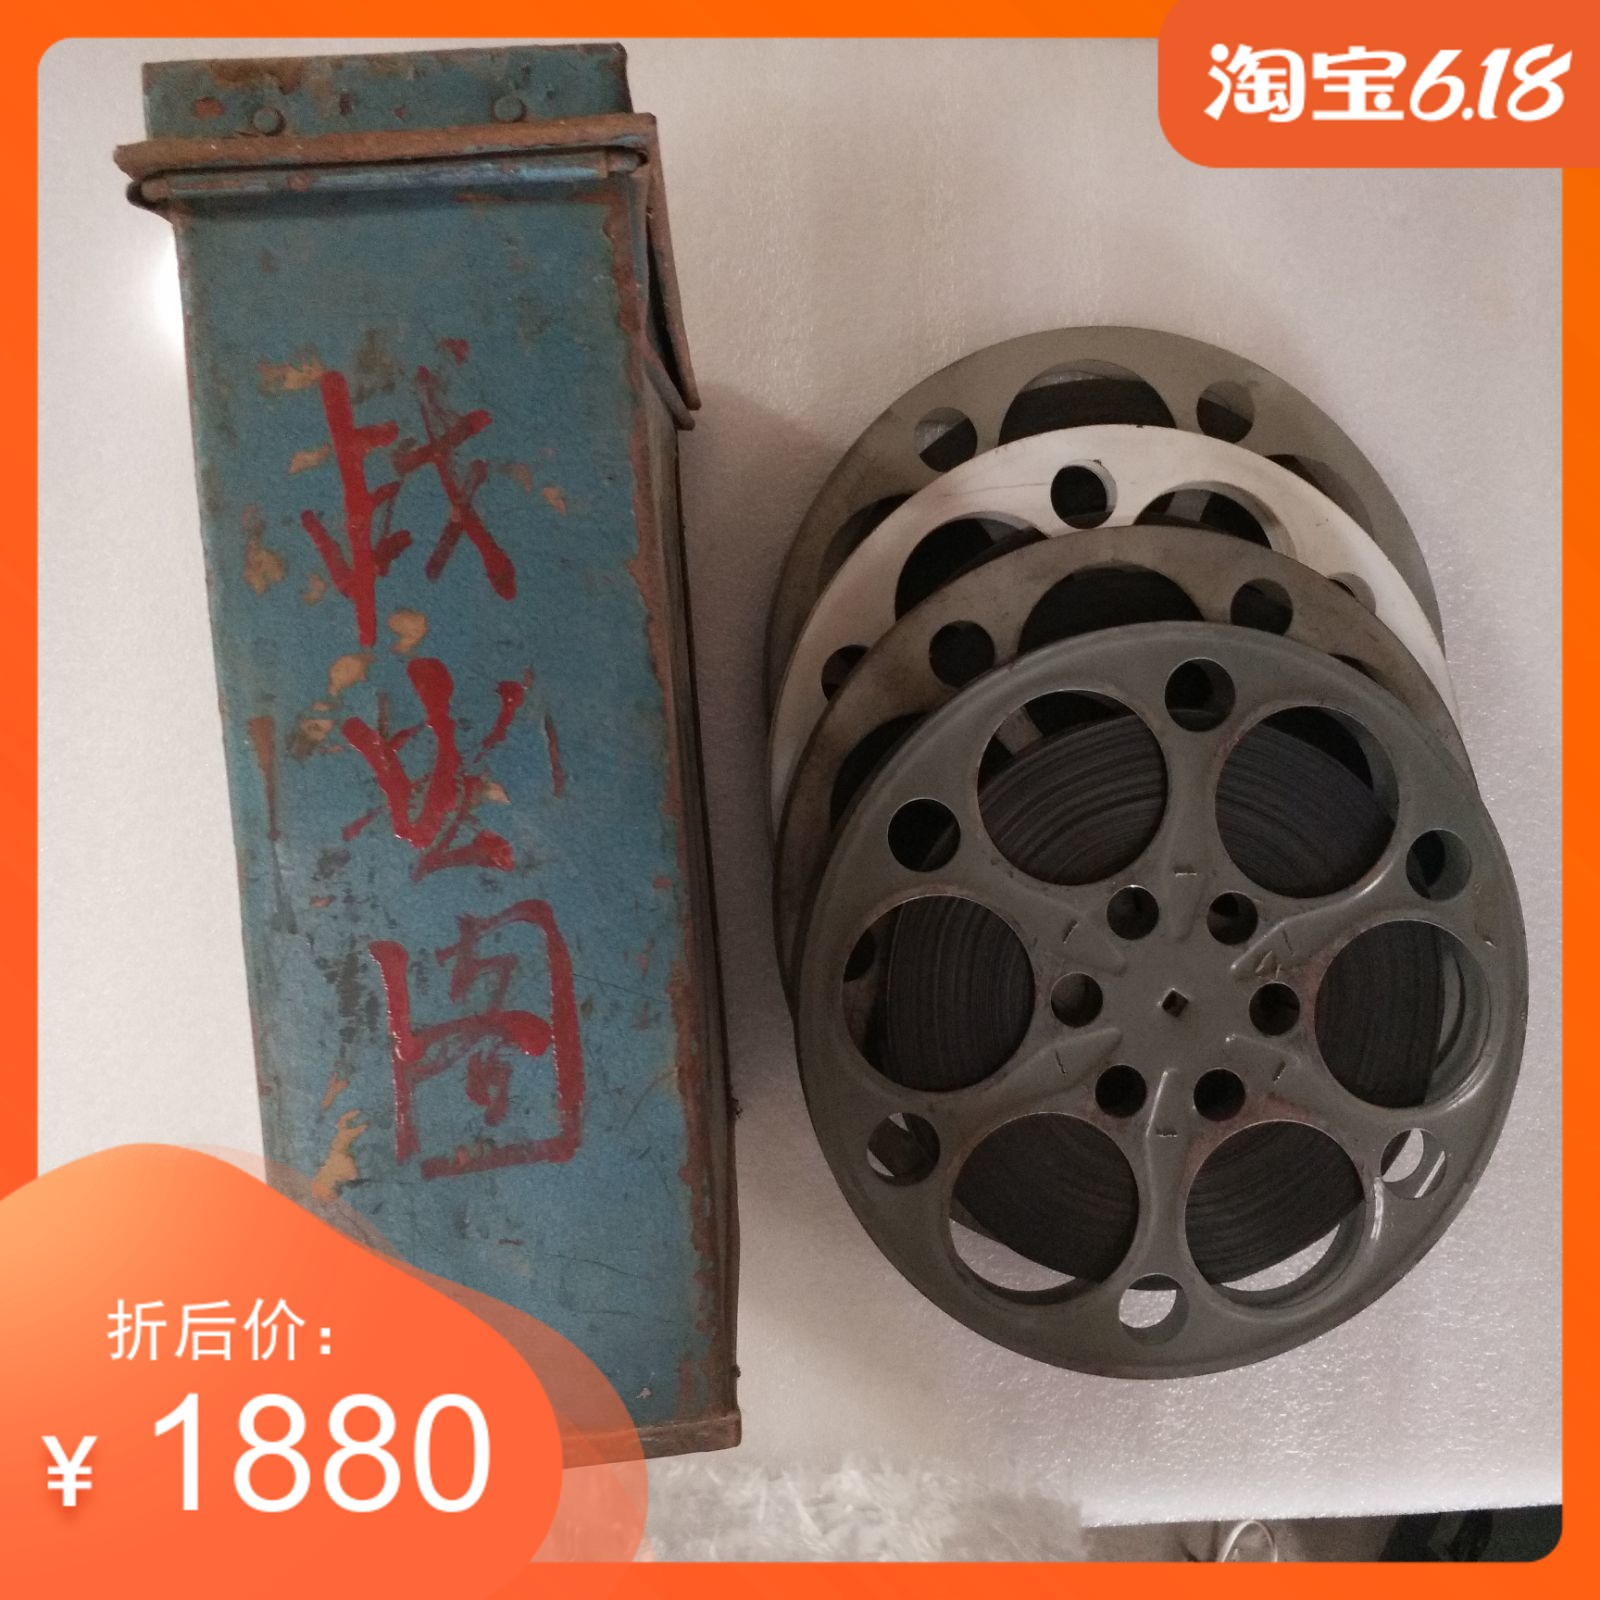 New Products 16mm Movie Negatives Movie Copy Old Projector Glue Roll Classic Color Cultural Revolution Story Movie Warfare Hongtu